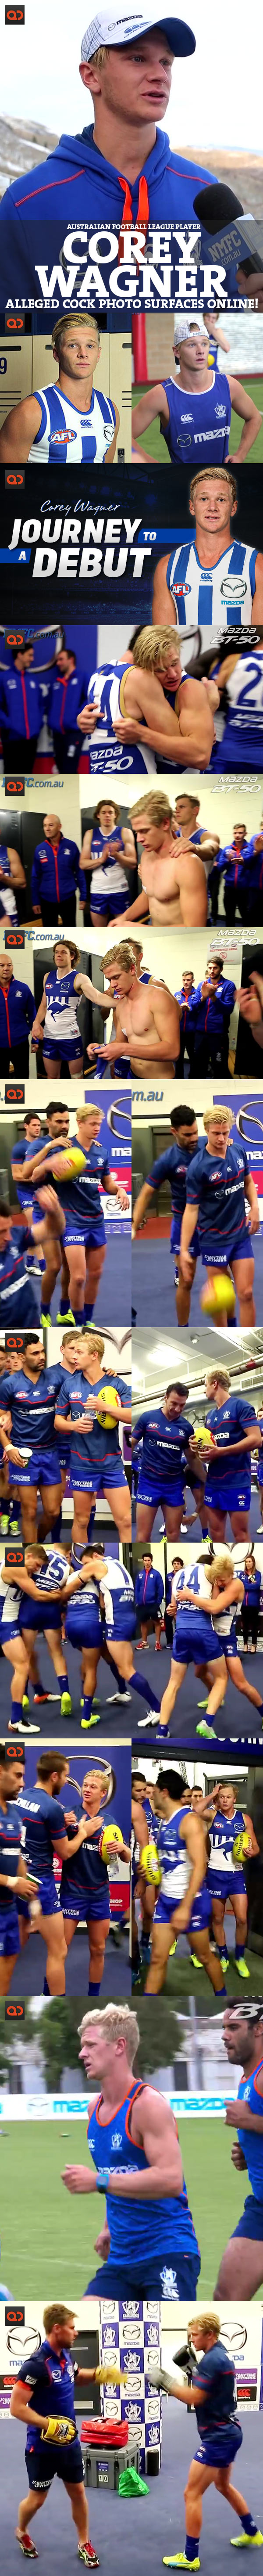 qc-corey_wagner_australian_football_league_player_alleged_cock_photo-collage01